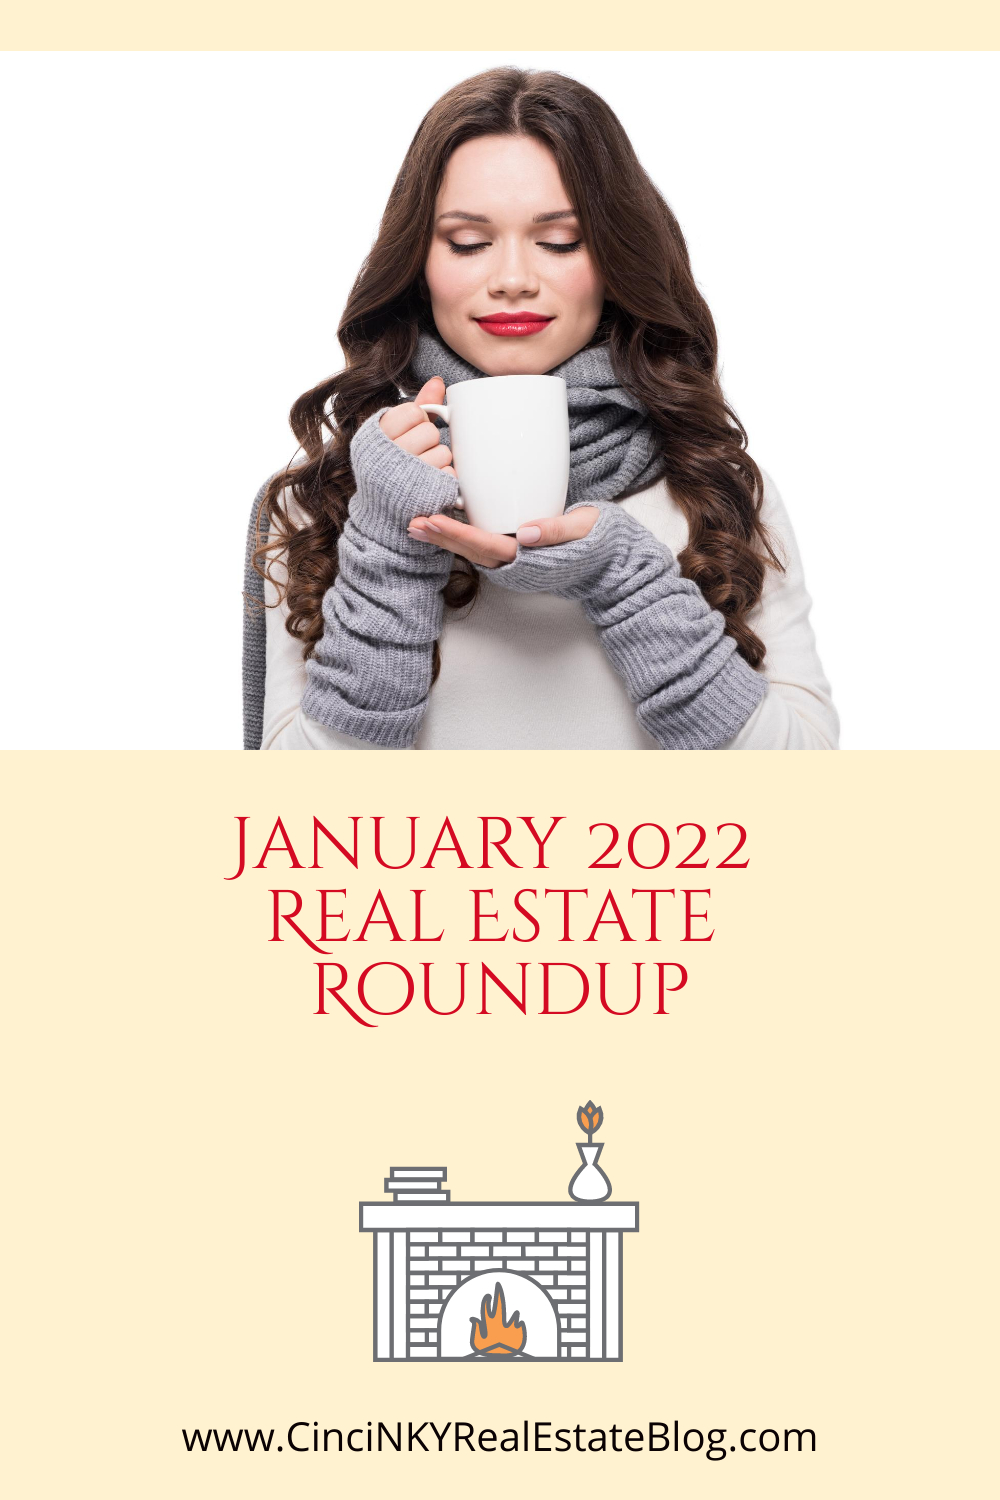 January 2022 Real Estate Roundup